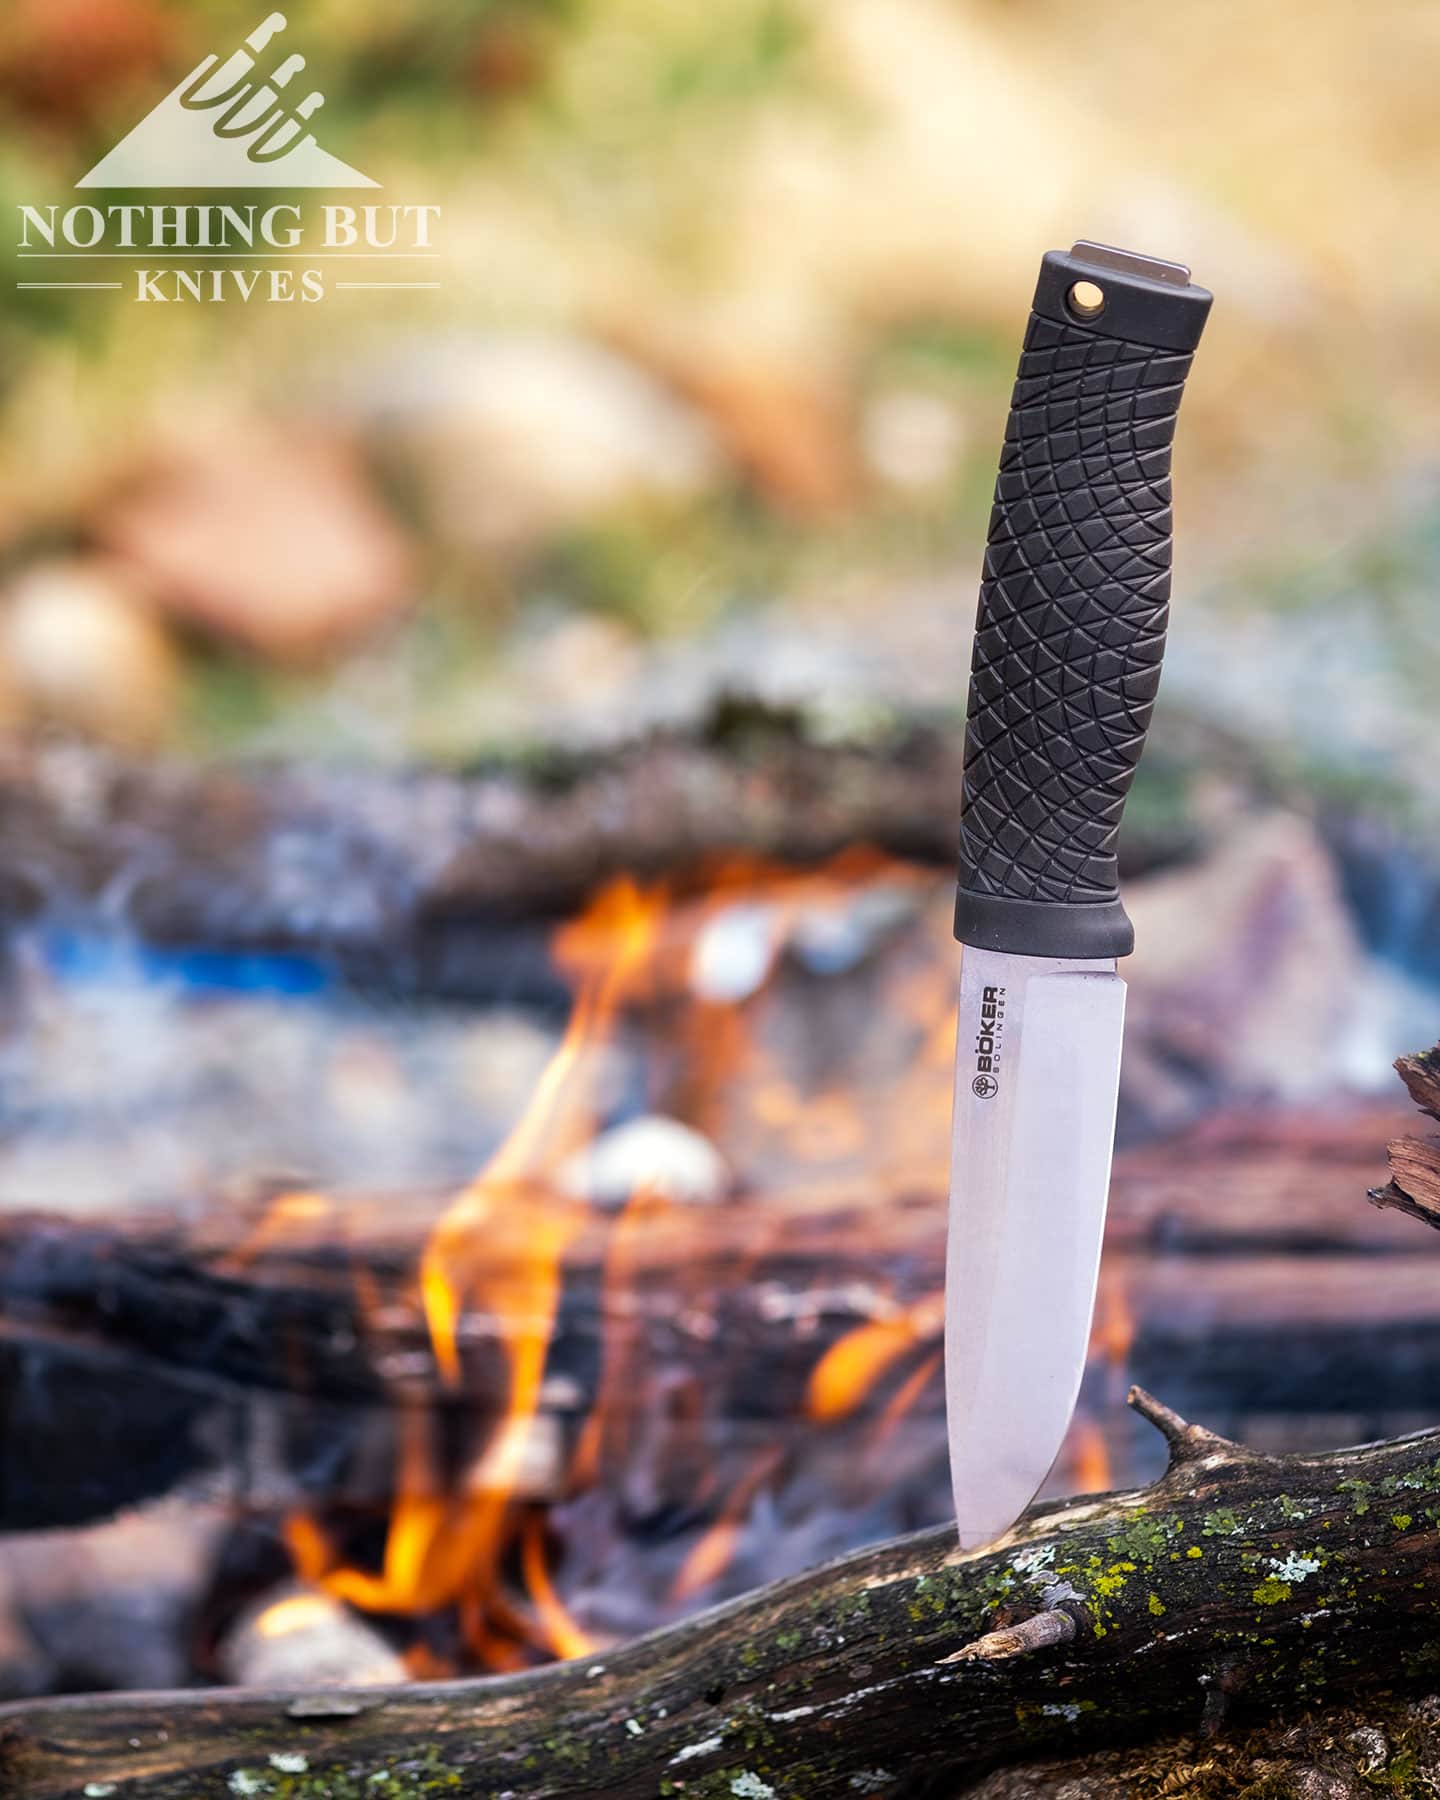 The Boker Bronco made in Solingen, Germany is pictured here next to a campfire,